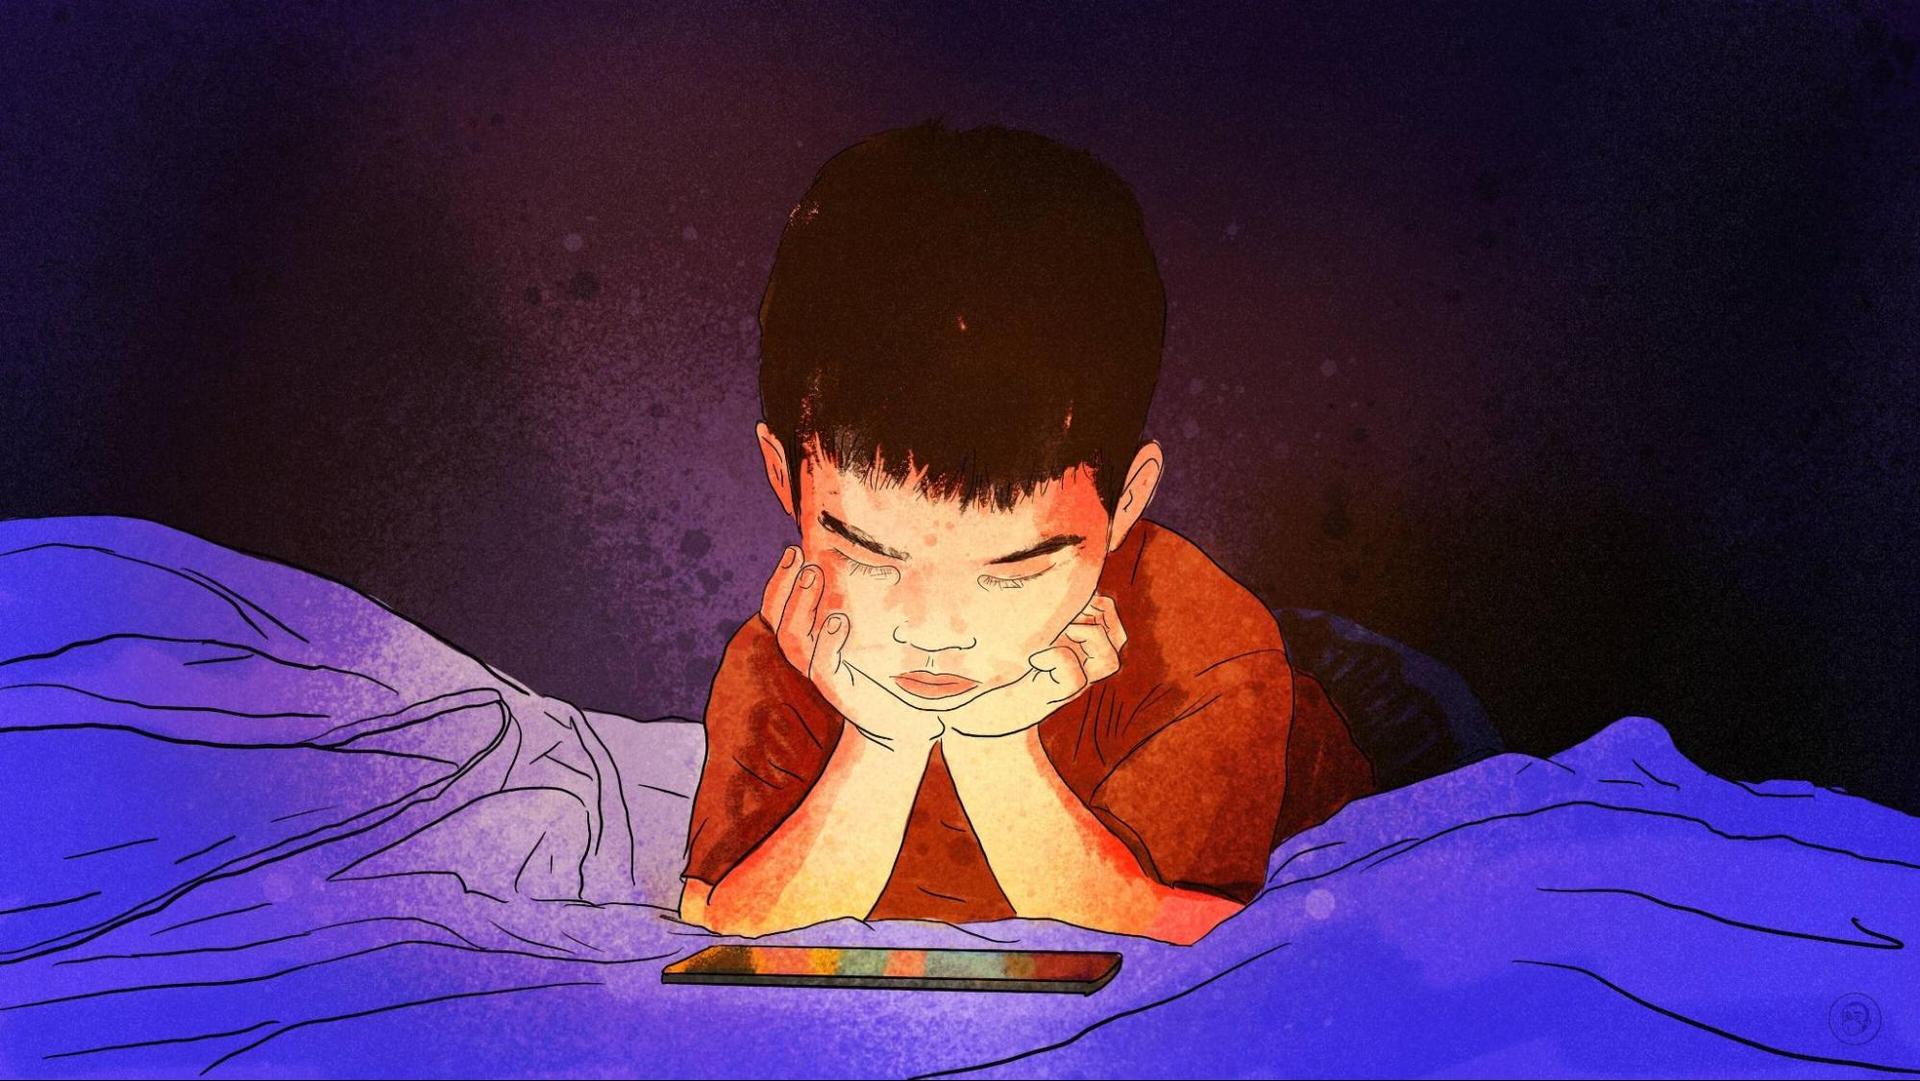 An illustration by Alex Santafe depicting a young boy watching a smartphone screen at night